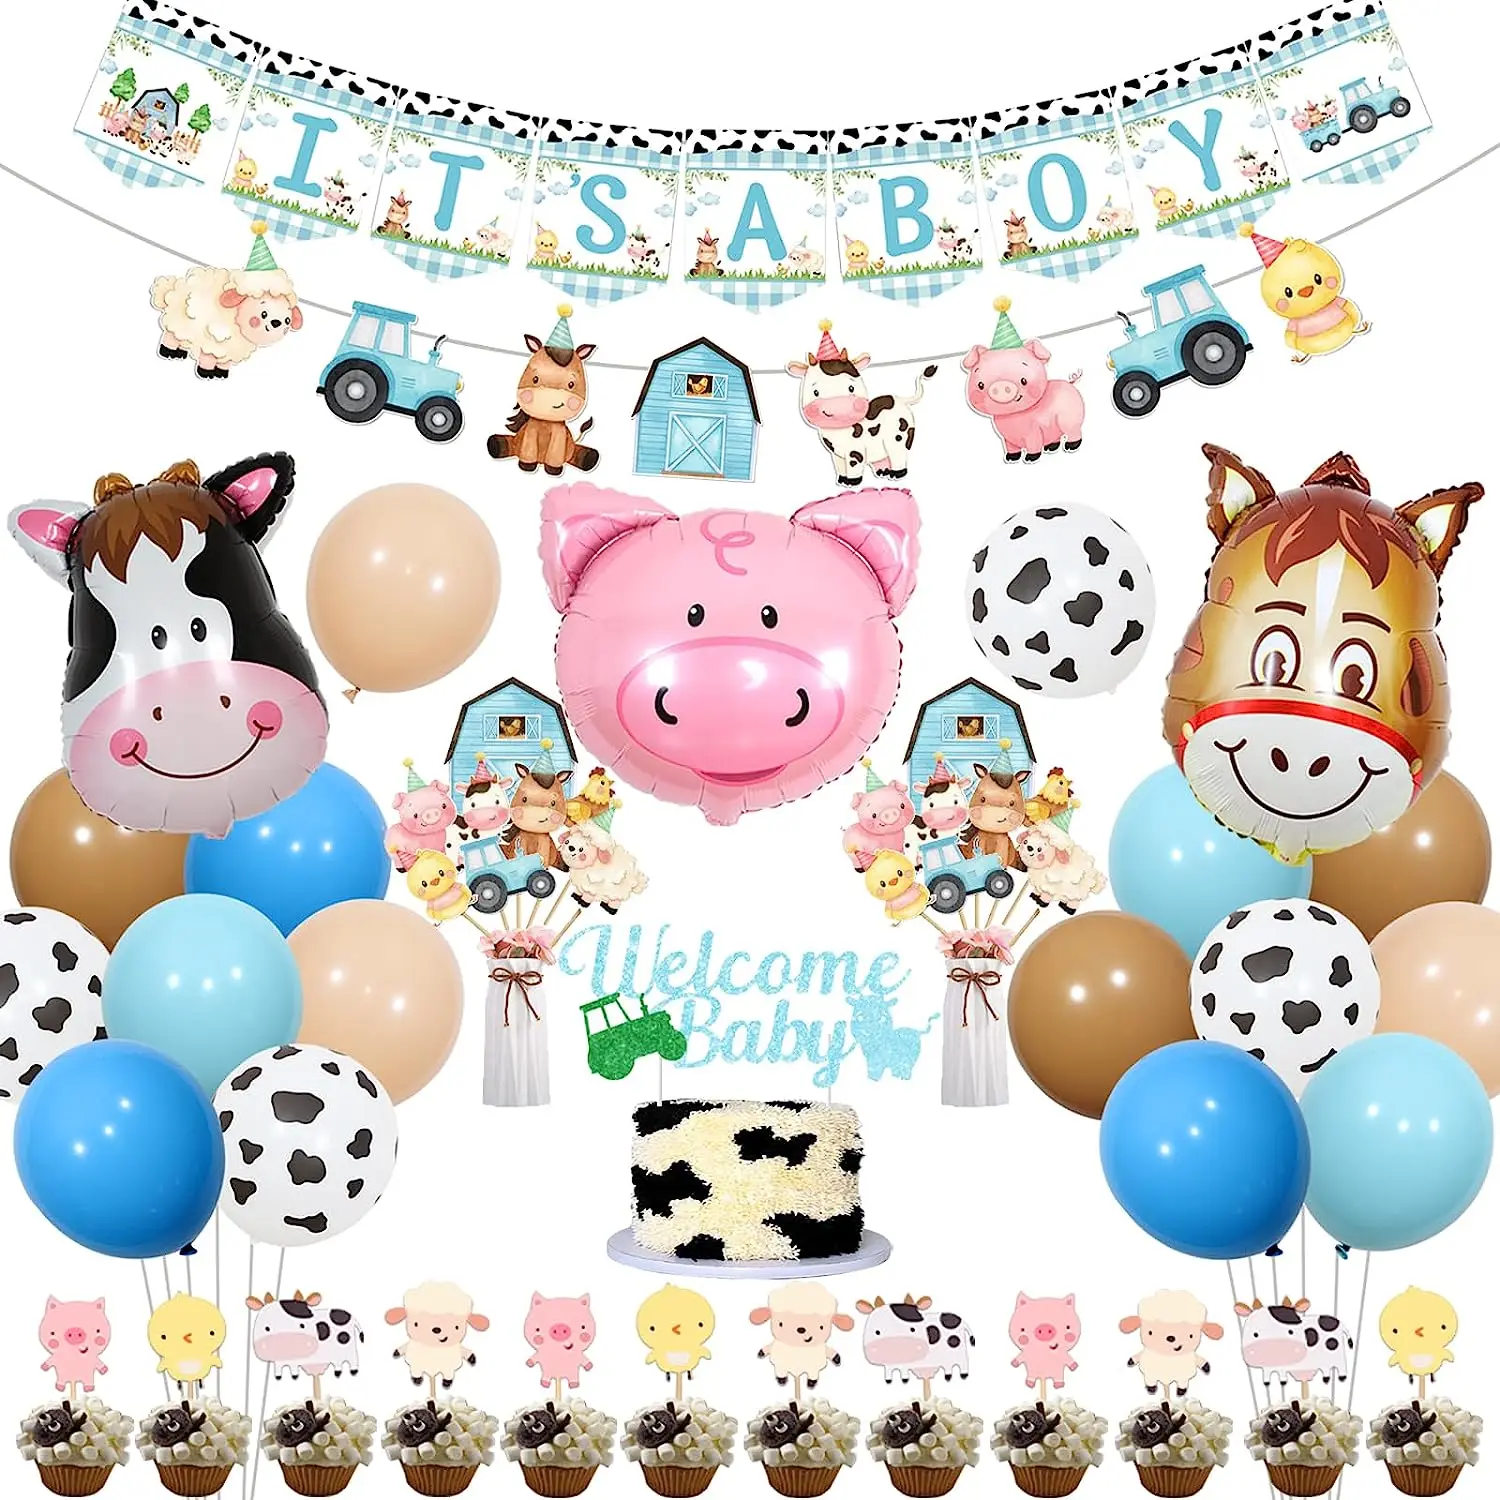 

Farm Animal Baby Shower Decorations It’s Boy Banner Garland Cake Toppers Baby Blue Balloons for Barnyard Gender Reveal Supplies